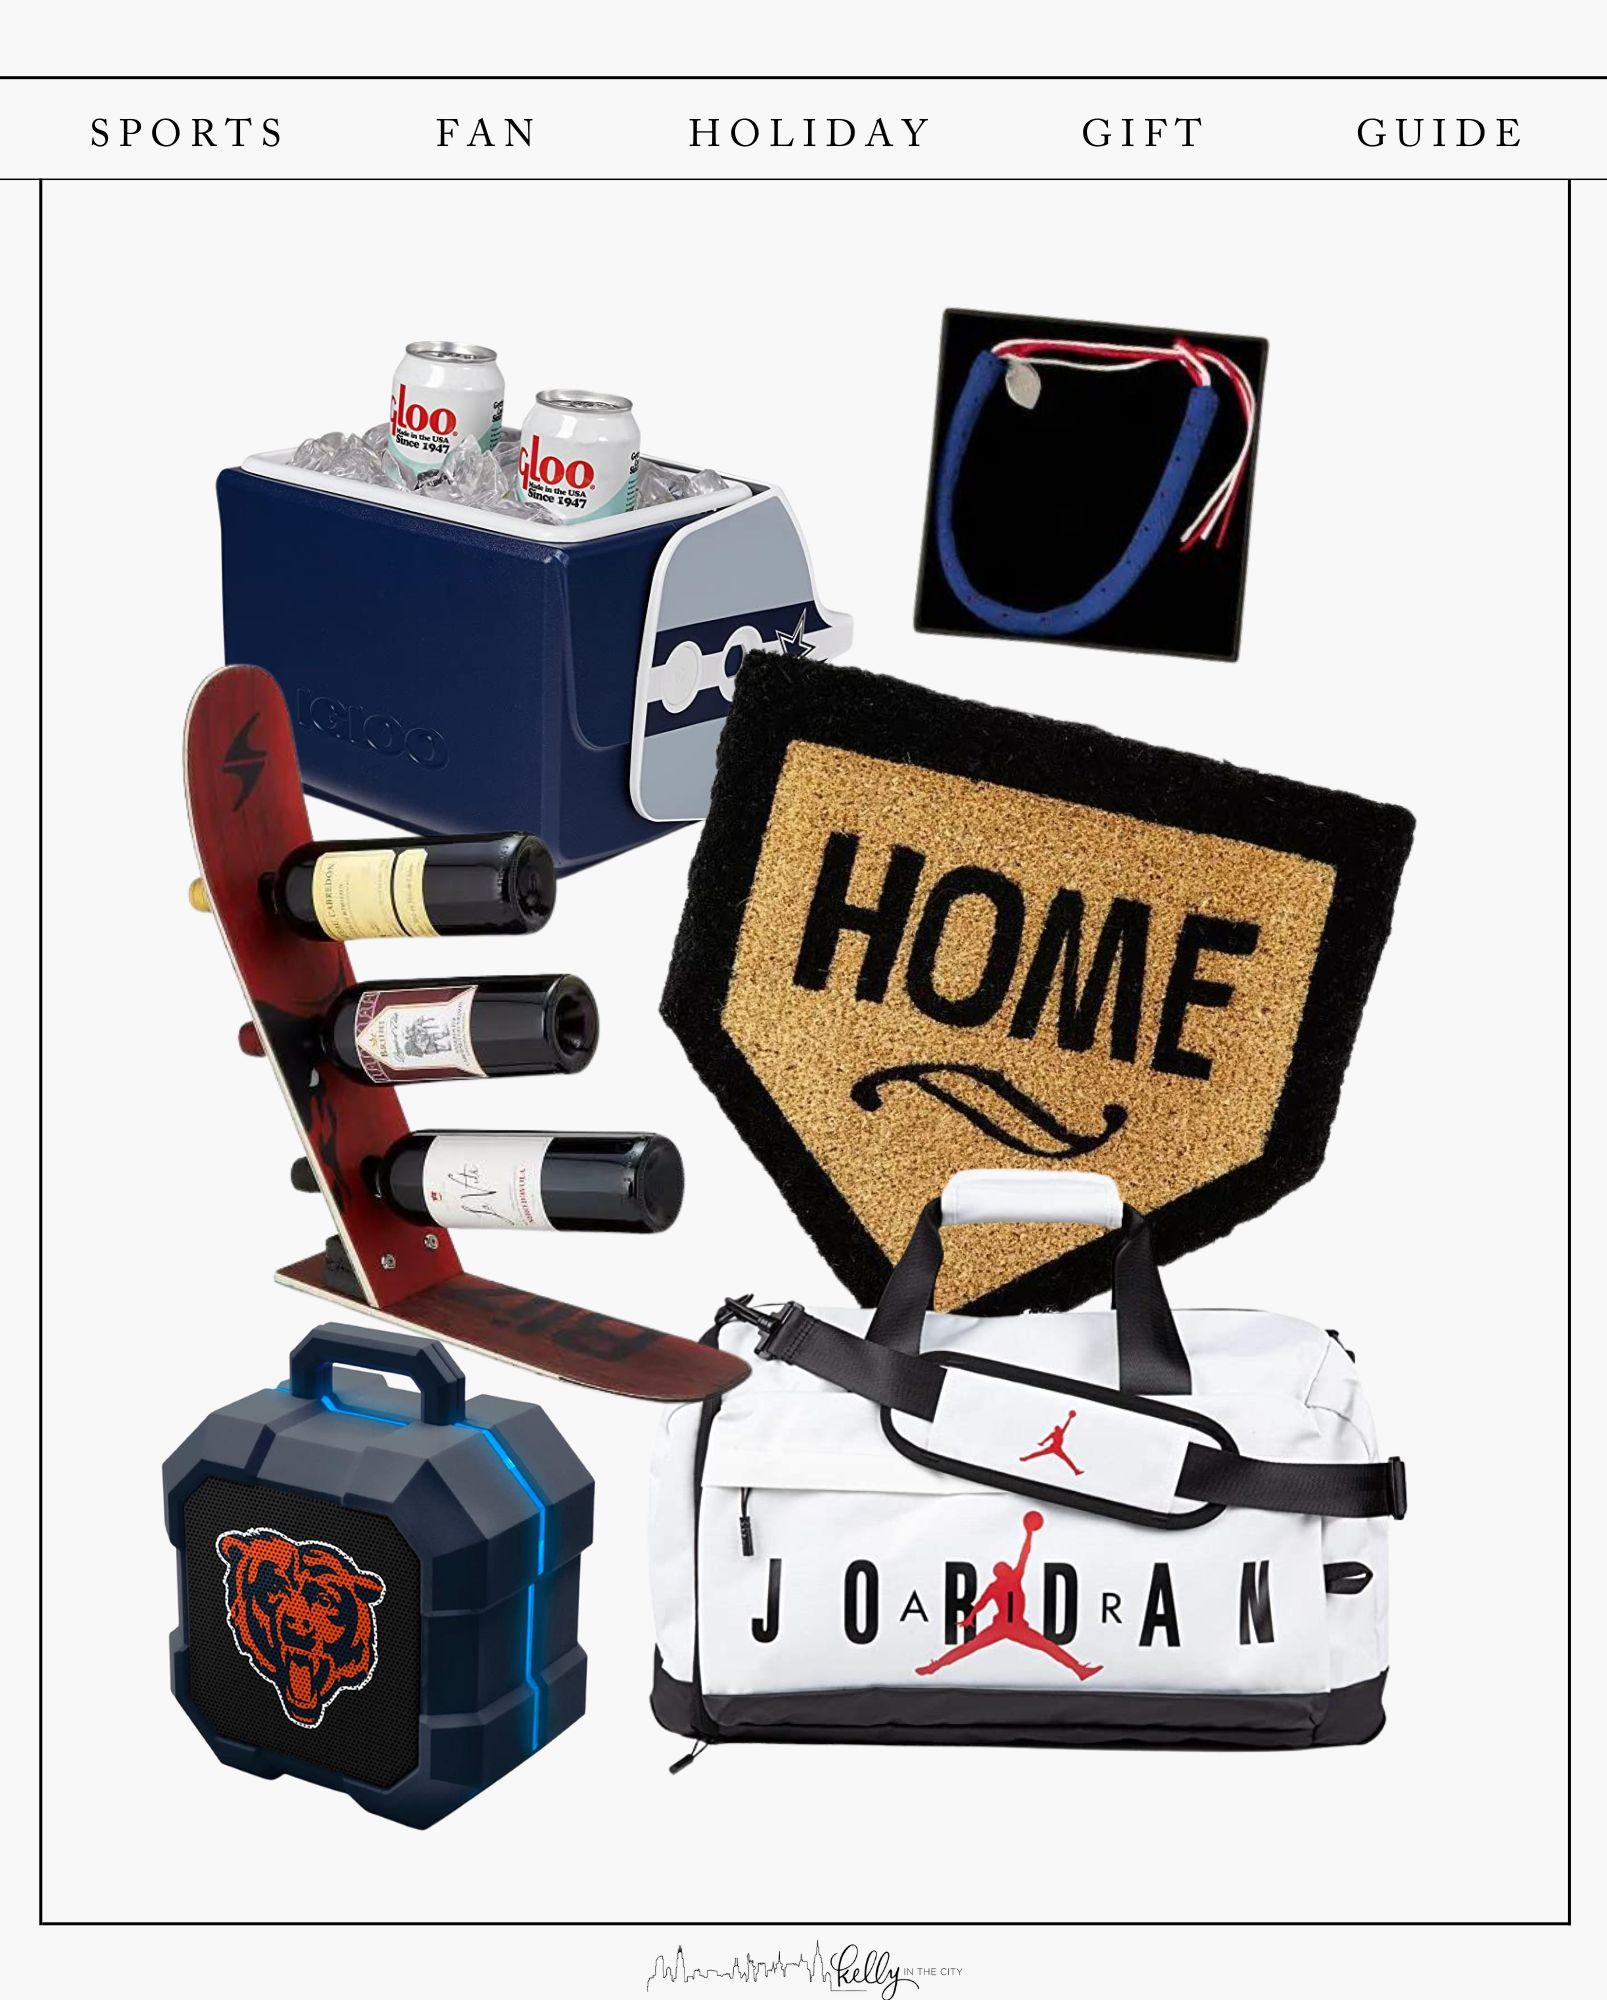 Gift Guide for Sports Fans